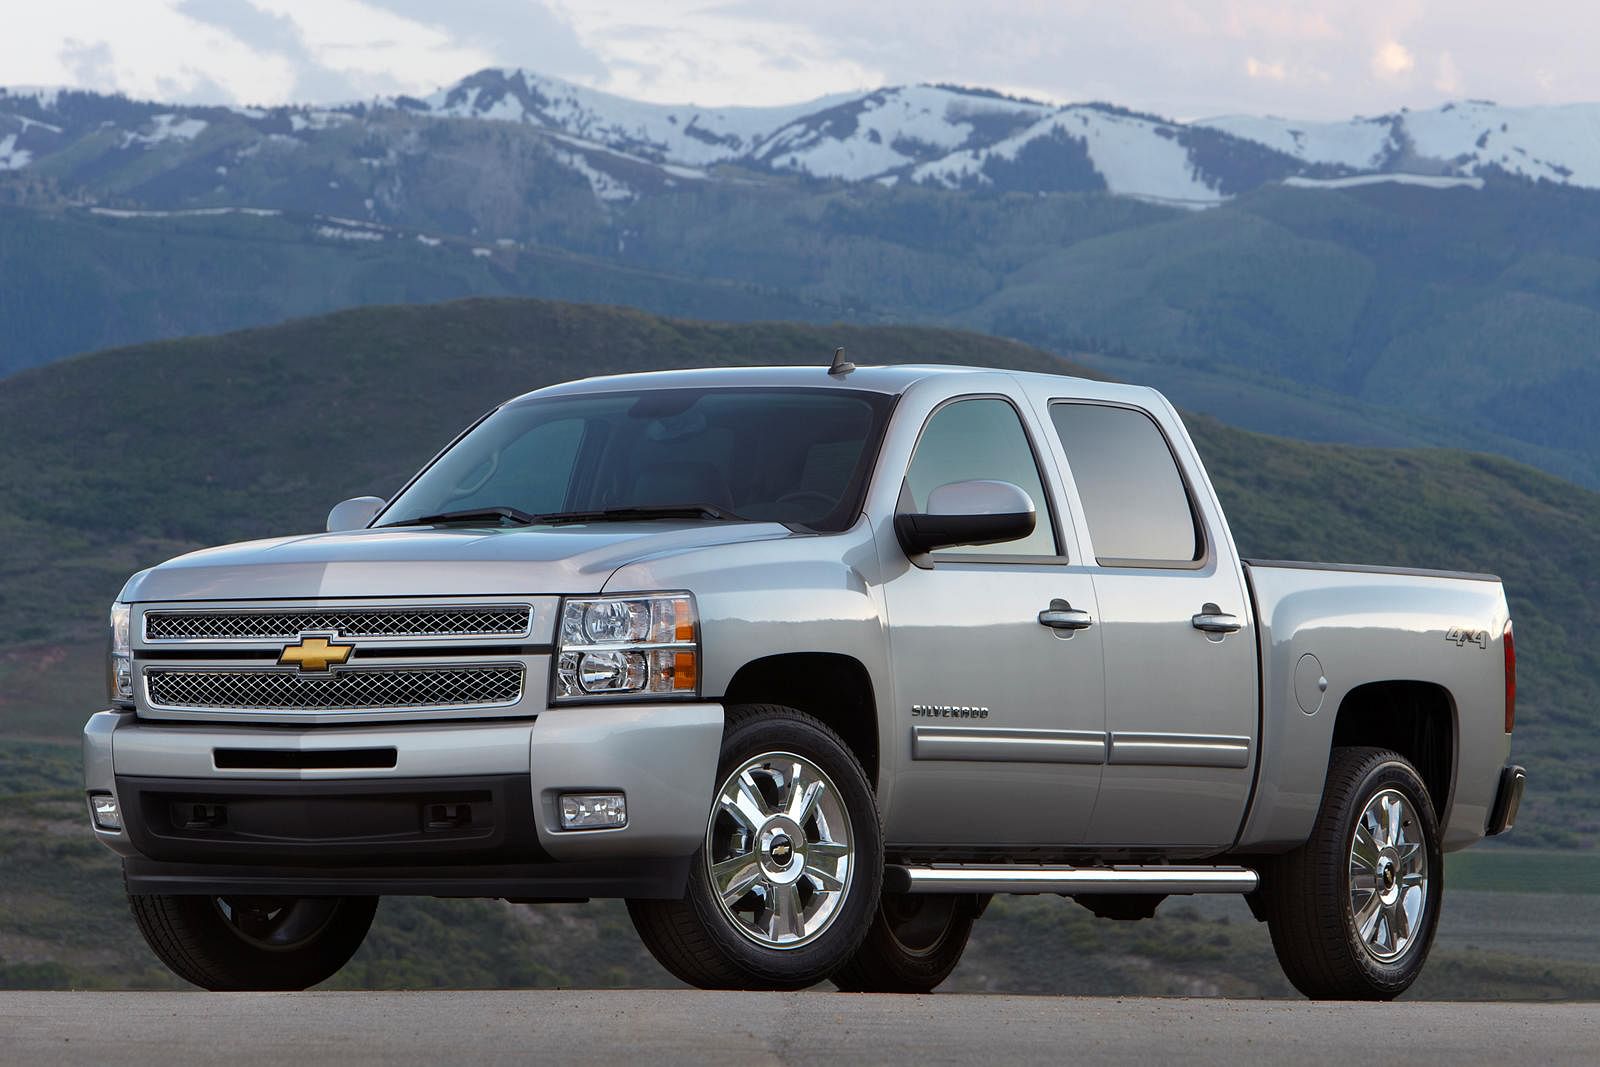 2013 Chevrolet Silverado 1500 Extended Cab Price, Review, Pictures and  Specs | CARHP